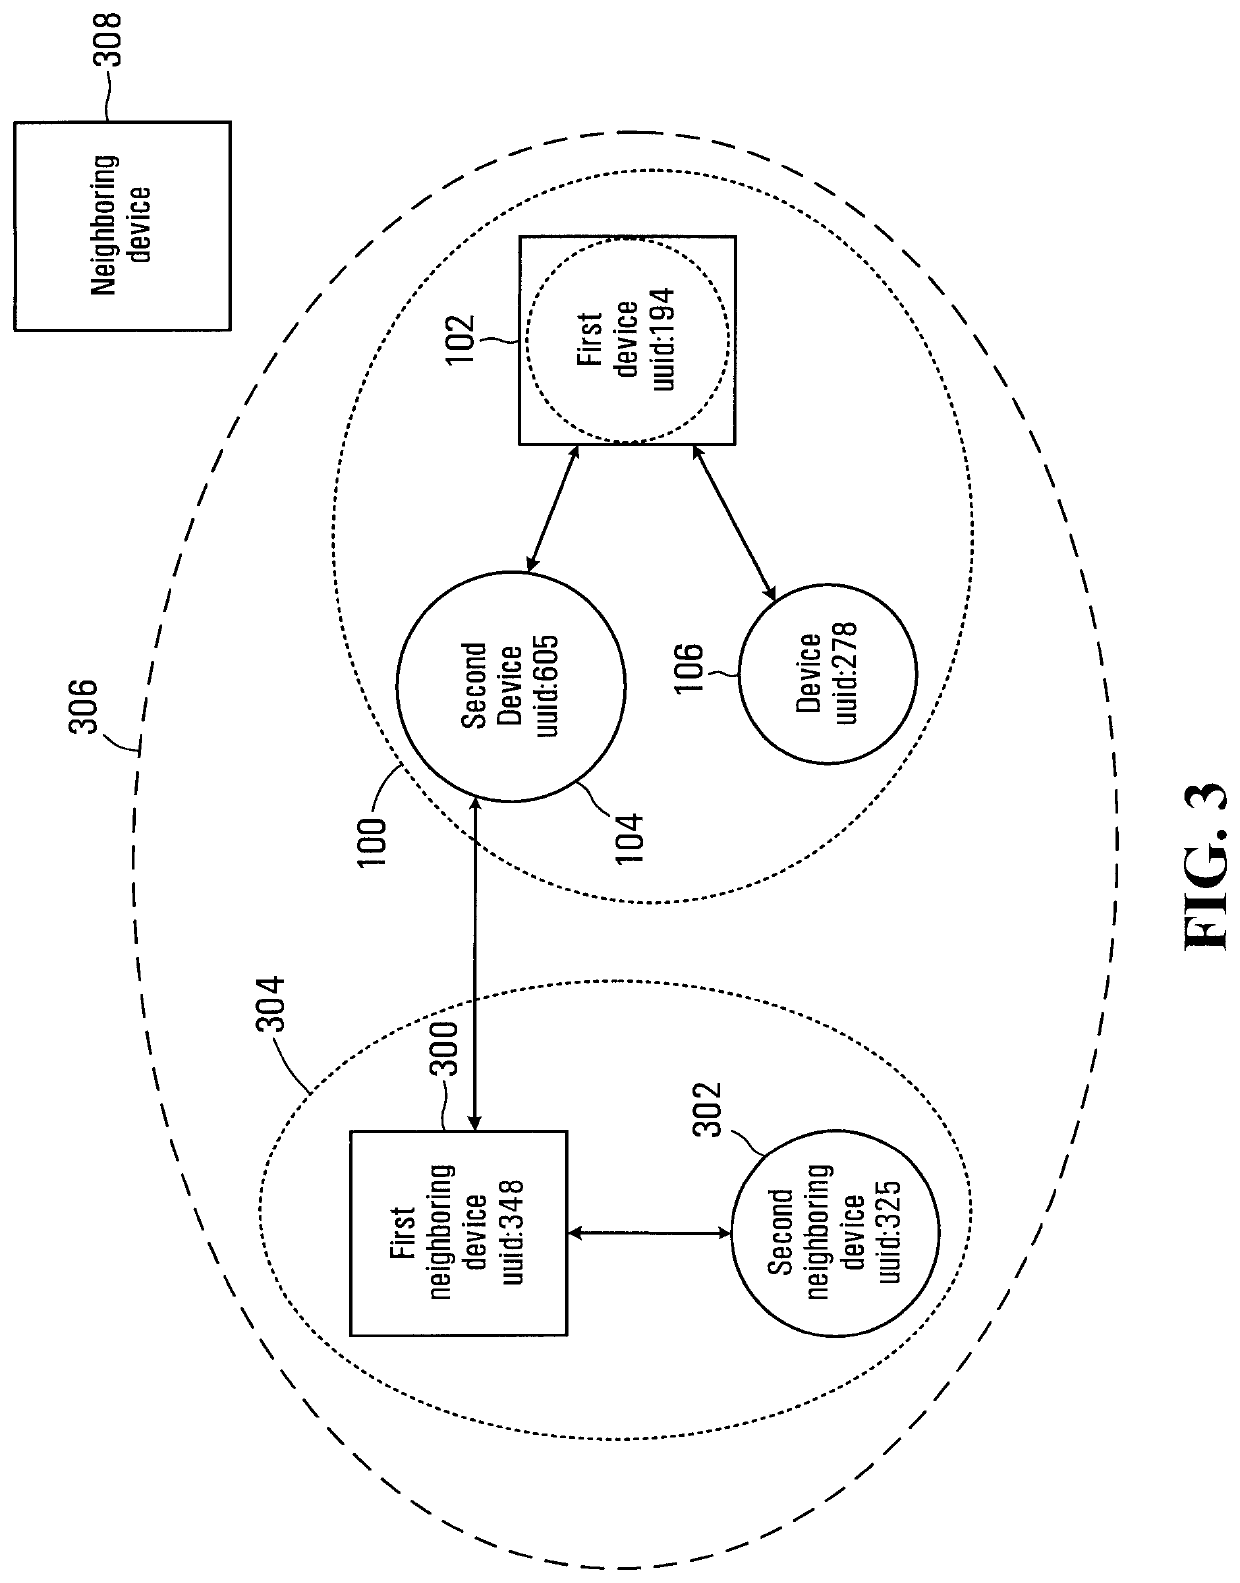 Method for establishing network clusters between networked devices